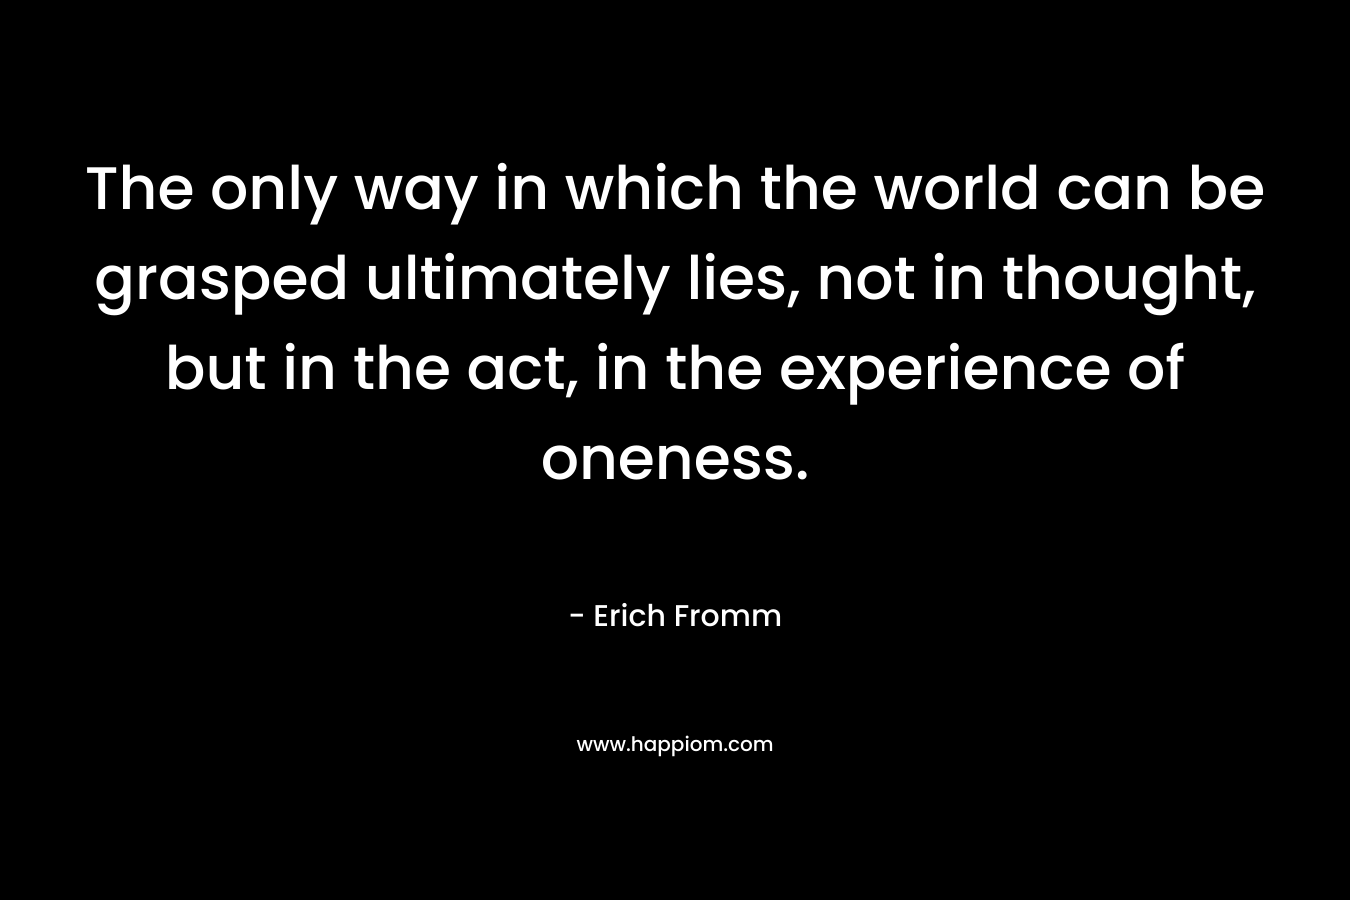 The only way in which the world can be grasped ultimately lies, not in thought, but in the act, in the experience of oneness. – Erich Fromm